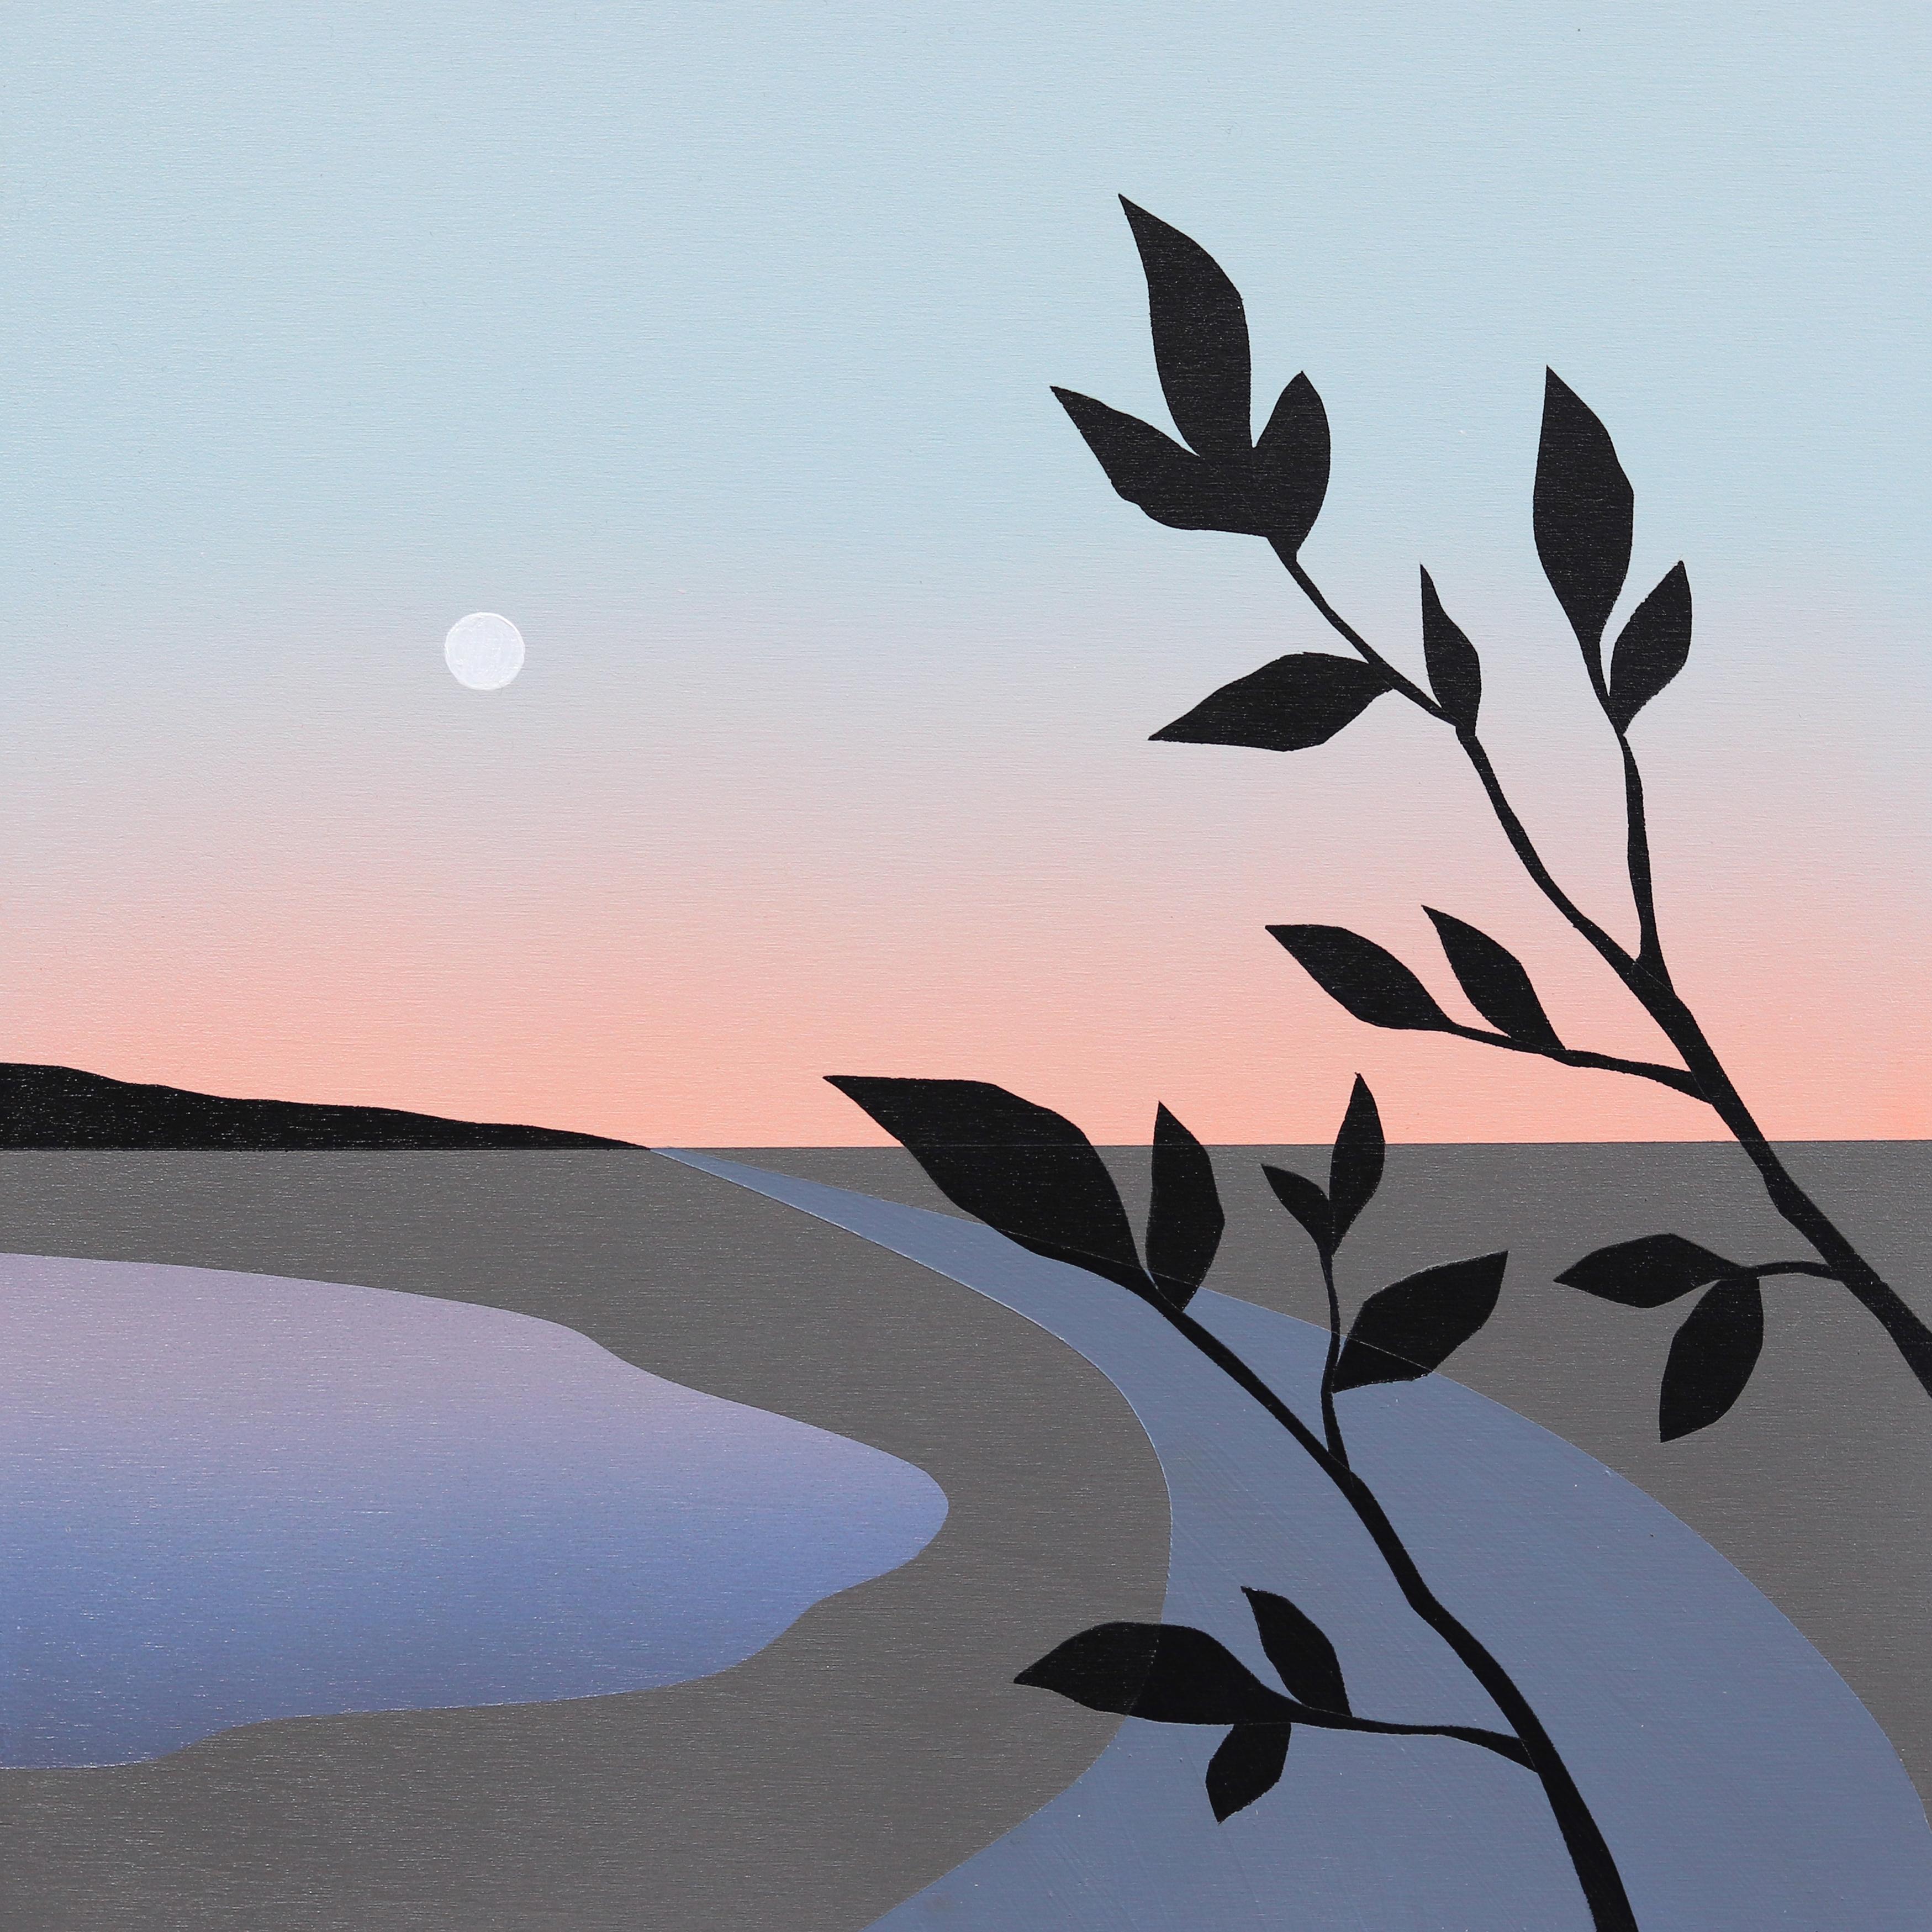 Leaving Town - Minimalist Scenic Landscape Painting